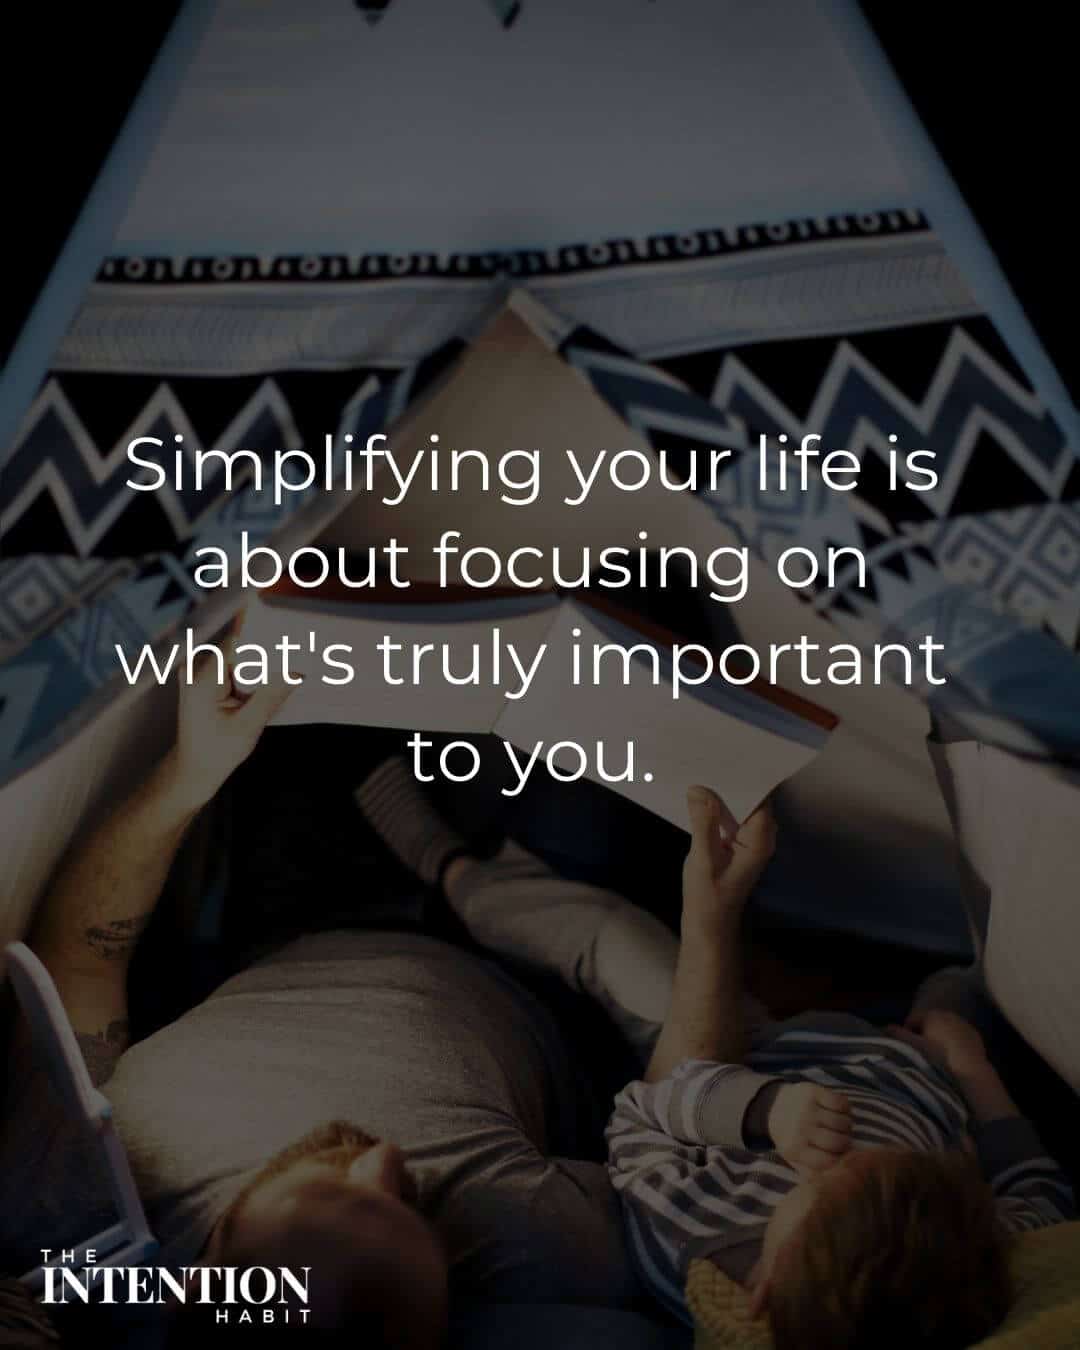 simple living quote - simplifying your life is about focusing on what's truly important to you